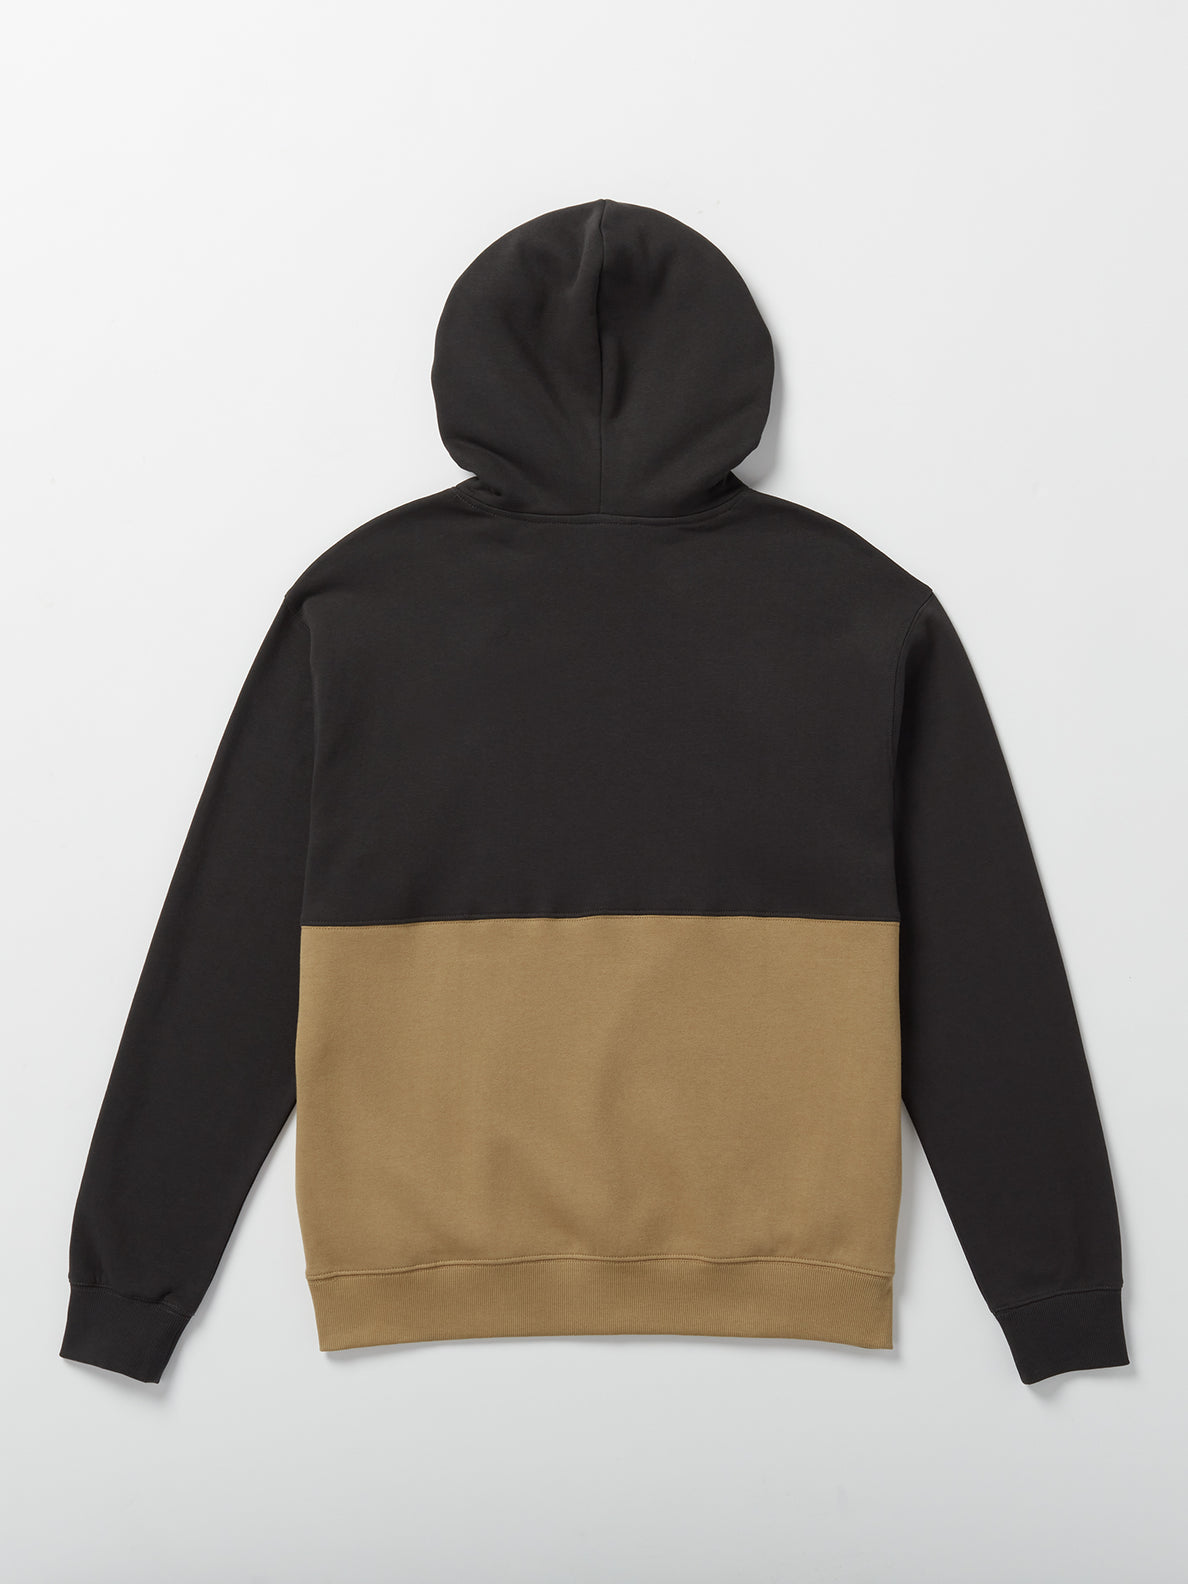 Divided Pullover Sweatshirt - Sand Brown (A4132303_SND) [B]